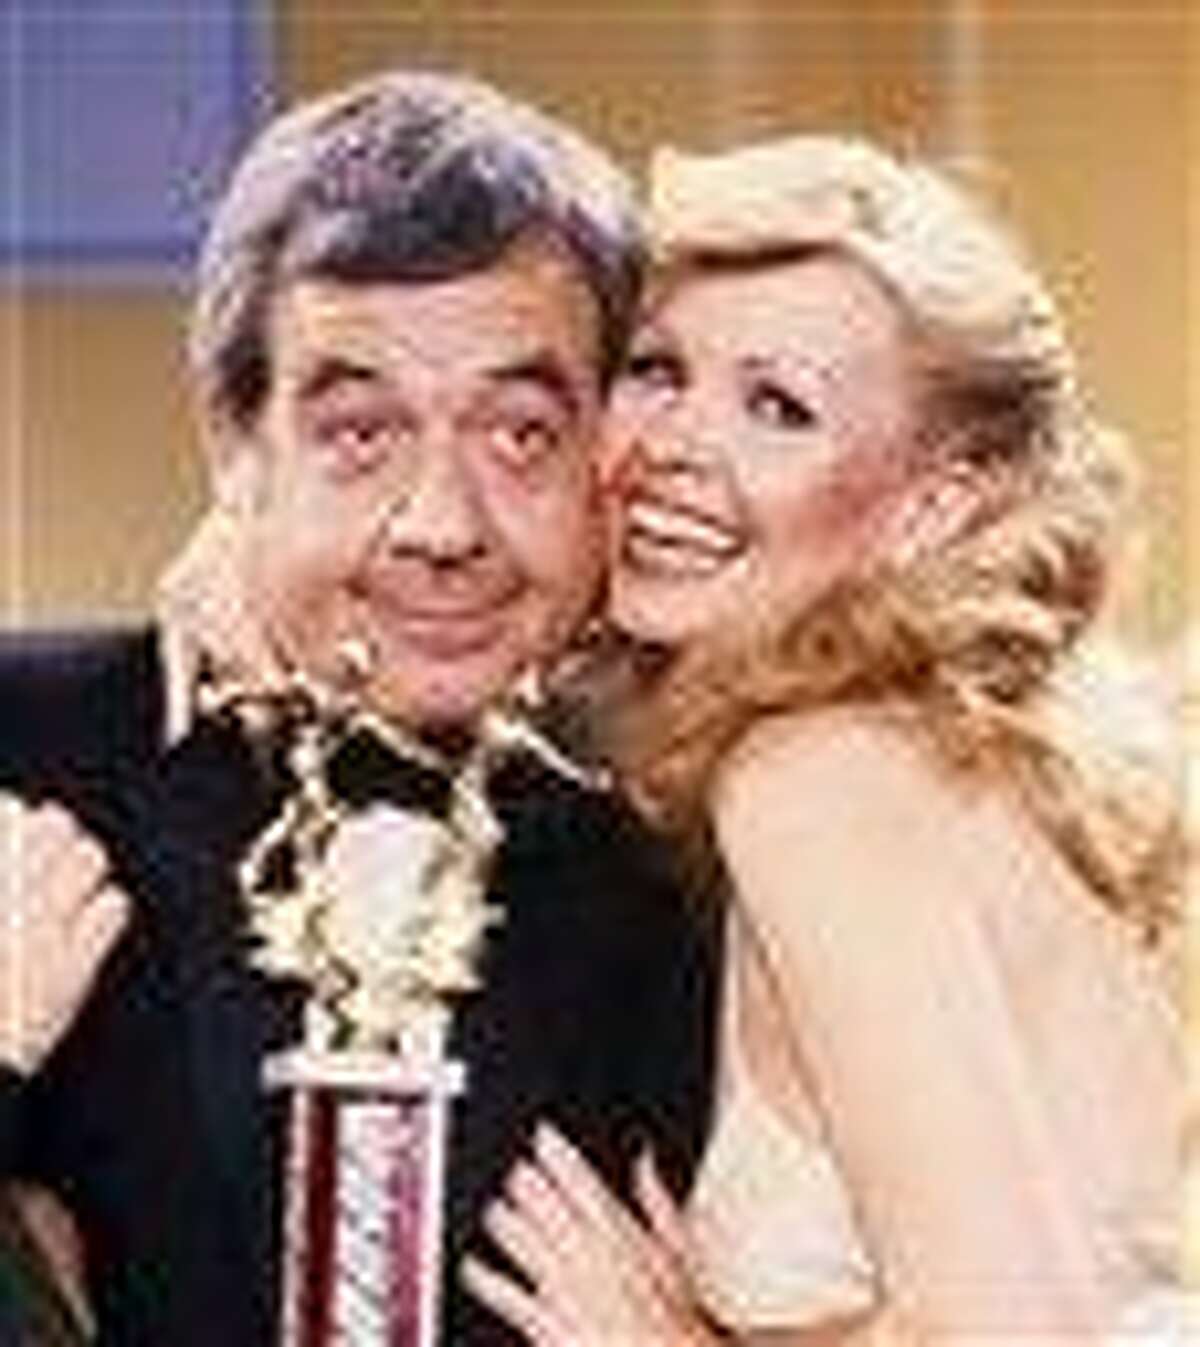 FILE - In this March 21, 1981 file photo, actorTom Bosley, who plays Mr. Cunningham on the series "Happy Days," embraces his real-life wife Patricia Carr Bosley, during the filming of a scene of "Happy Days," where she guest-starred. Bosley, the patient, understanding father on television's long-running "Happy Days," died of heart failure early Tuesday, Oct. 19, 2010, at a hospital near his home in Palm Springs, Calif. He was 83. (AP Photo/Reed Saxon, file)